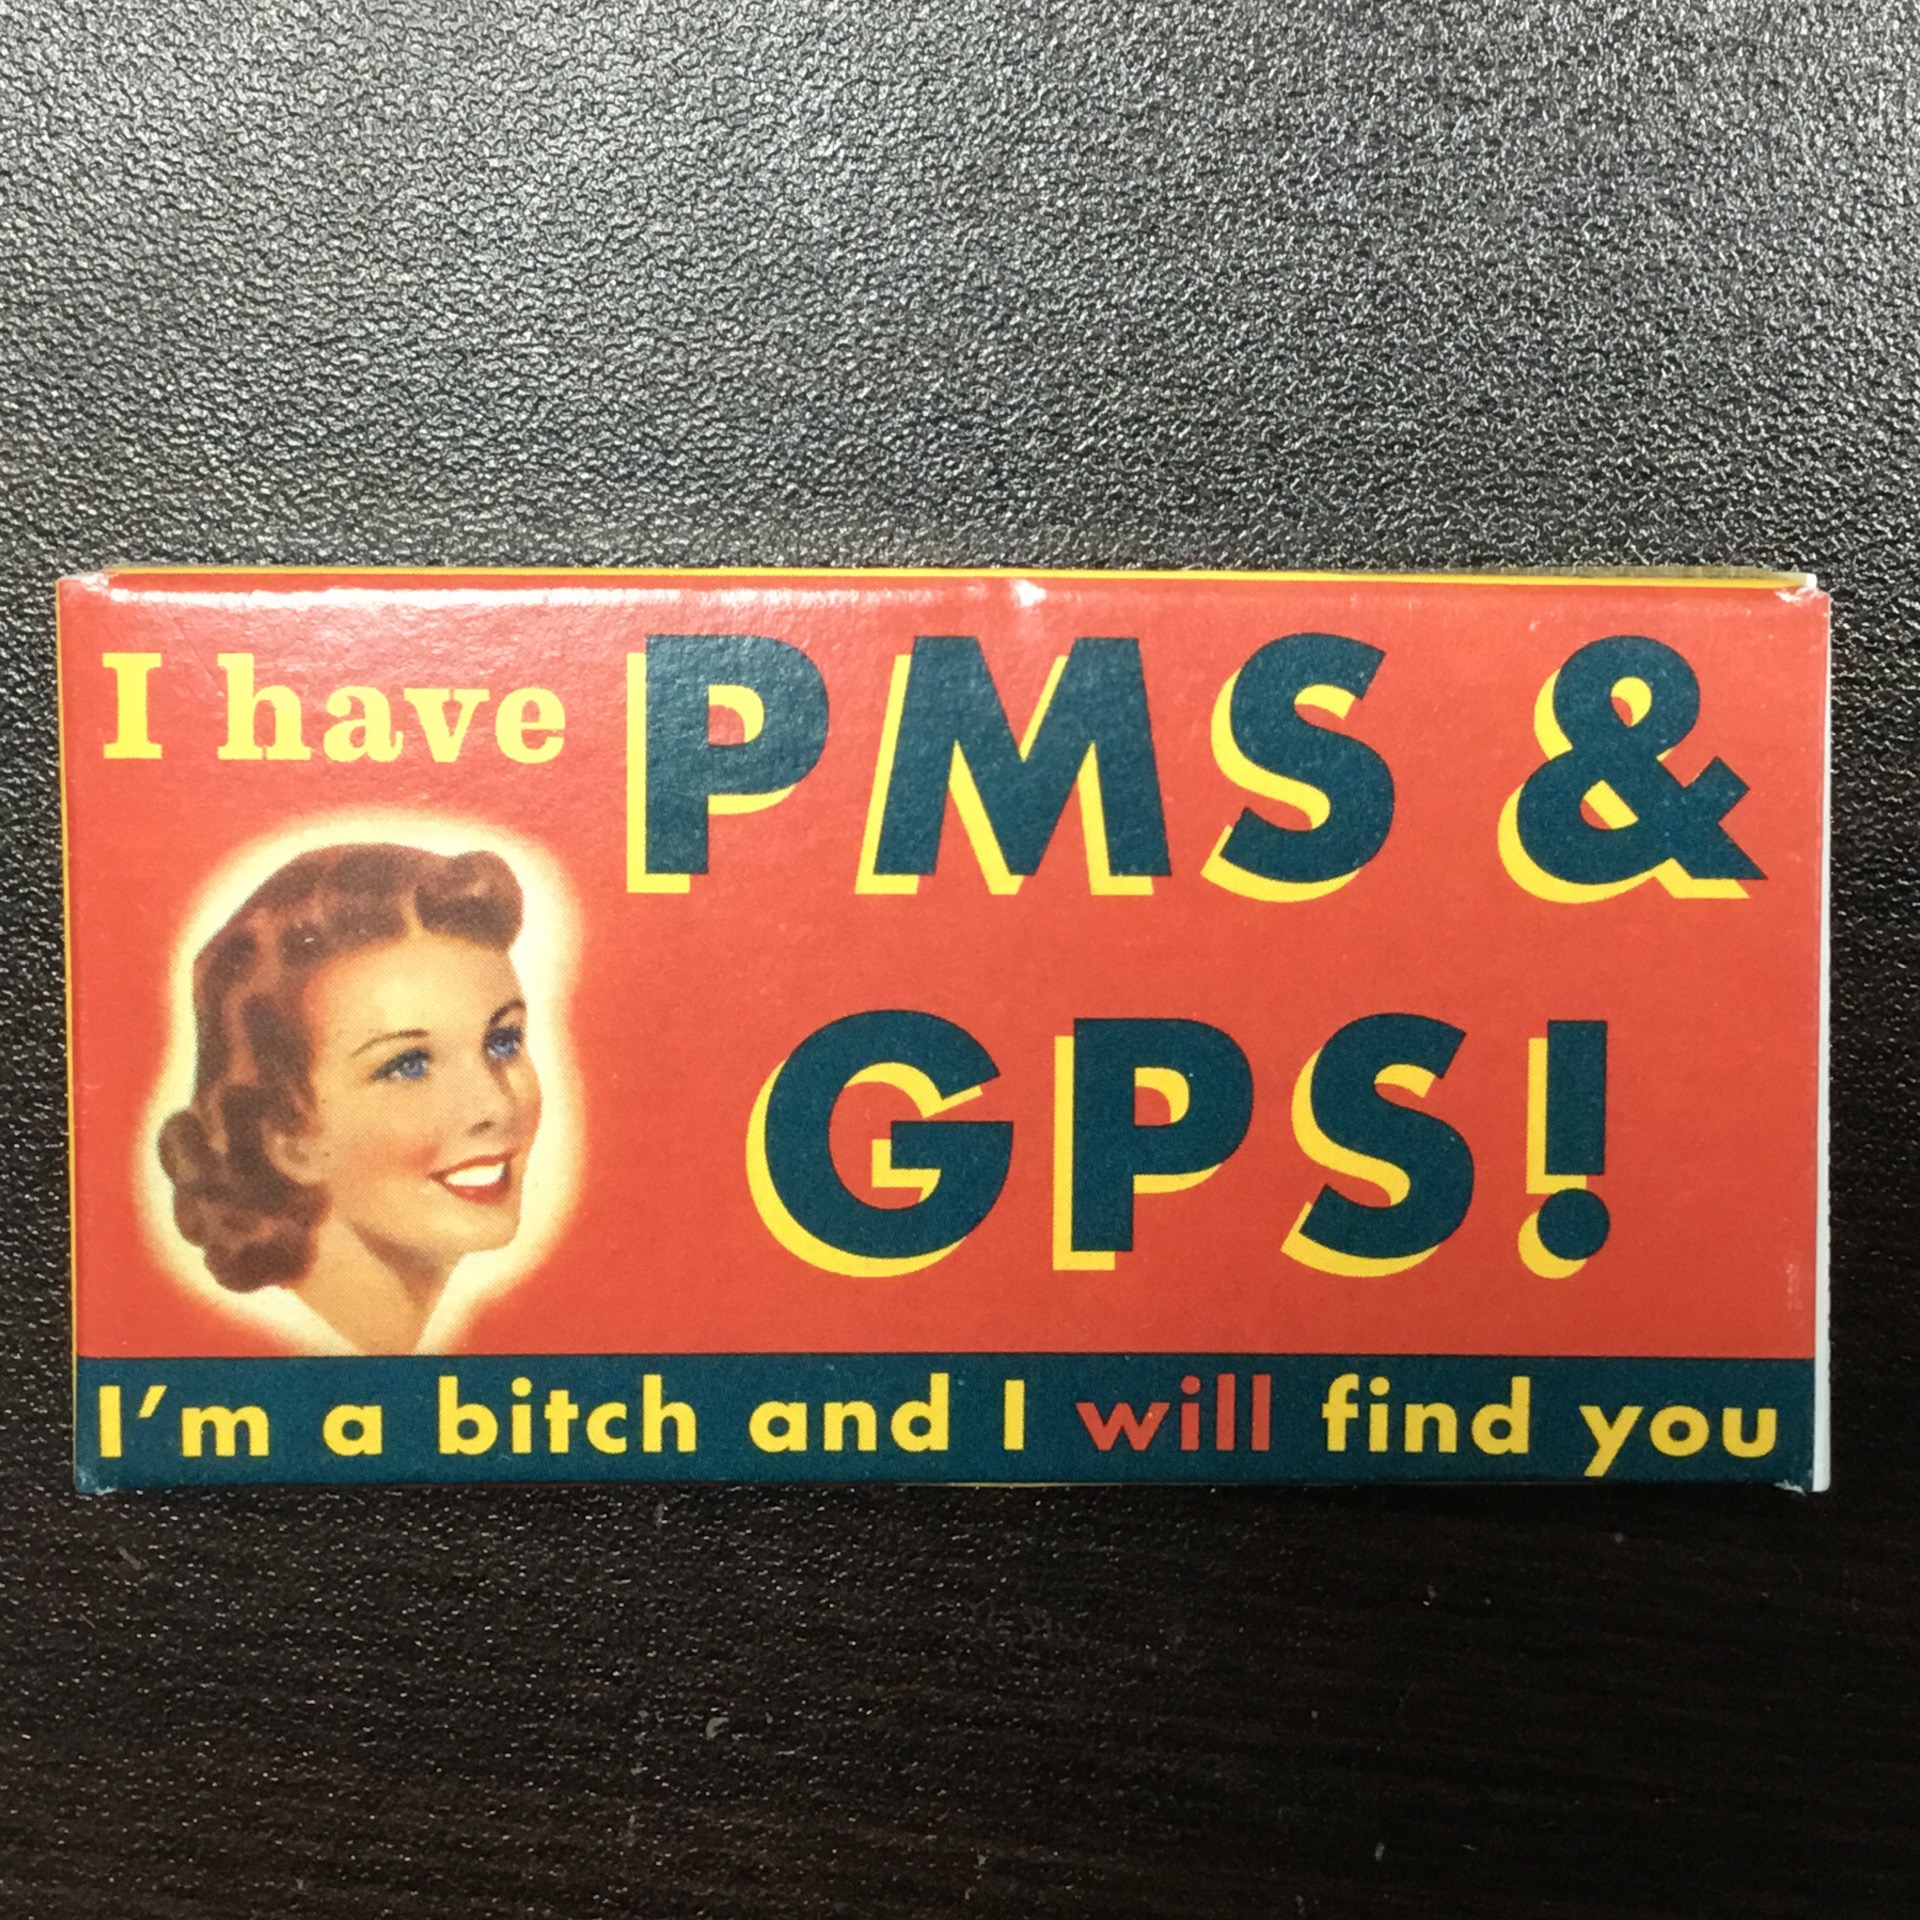 PMS Gum – Your Age (or don't)